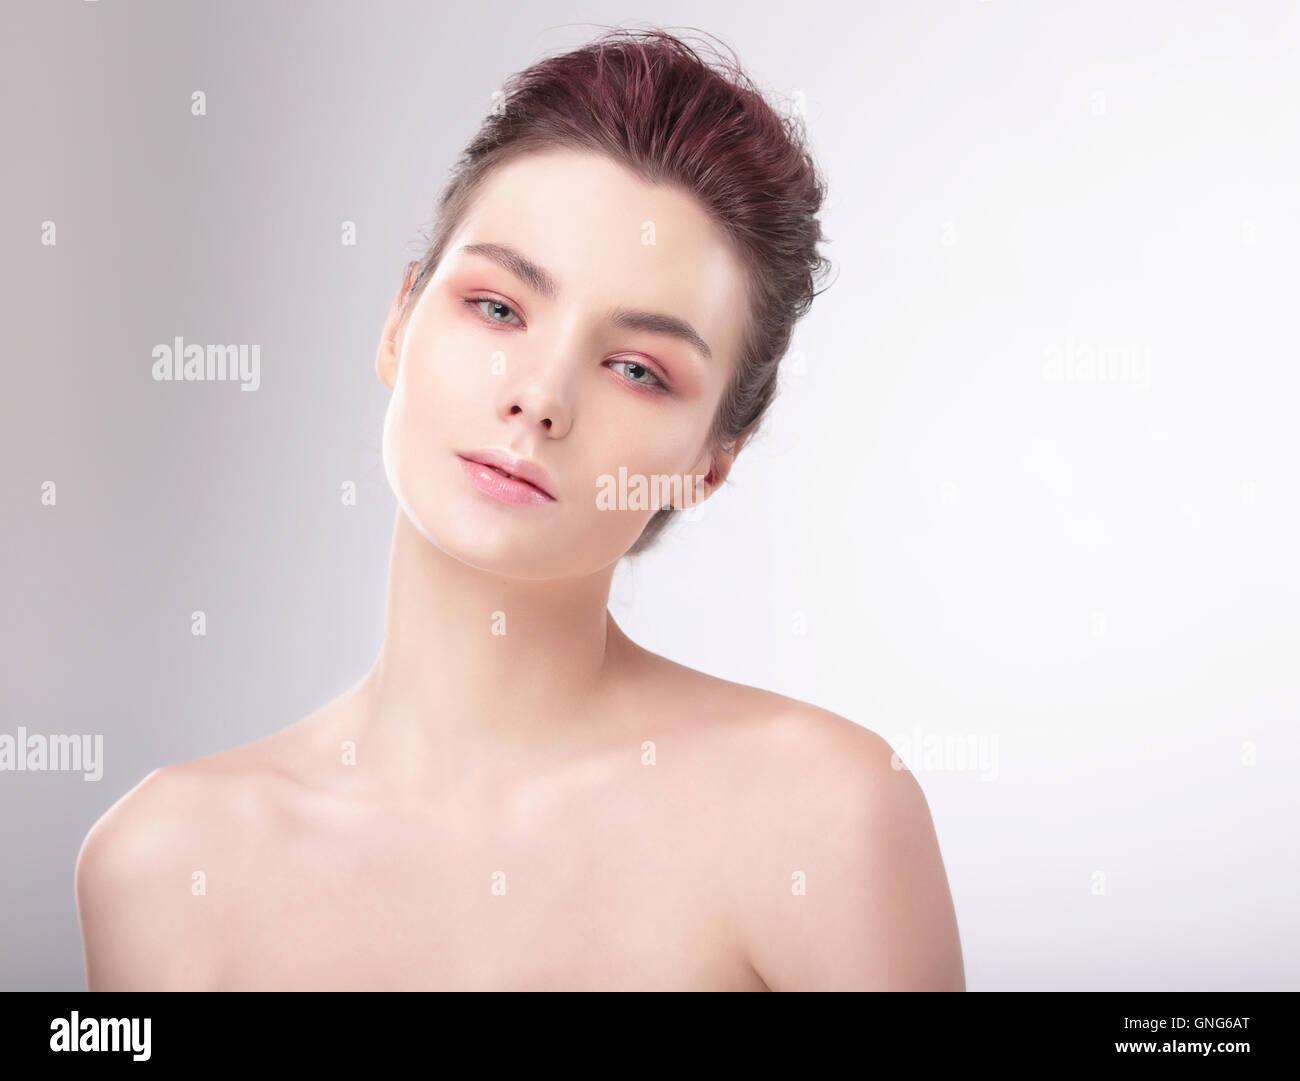 Portrait of woman with clean skin. Natural, clean and bright. Stock Photo